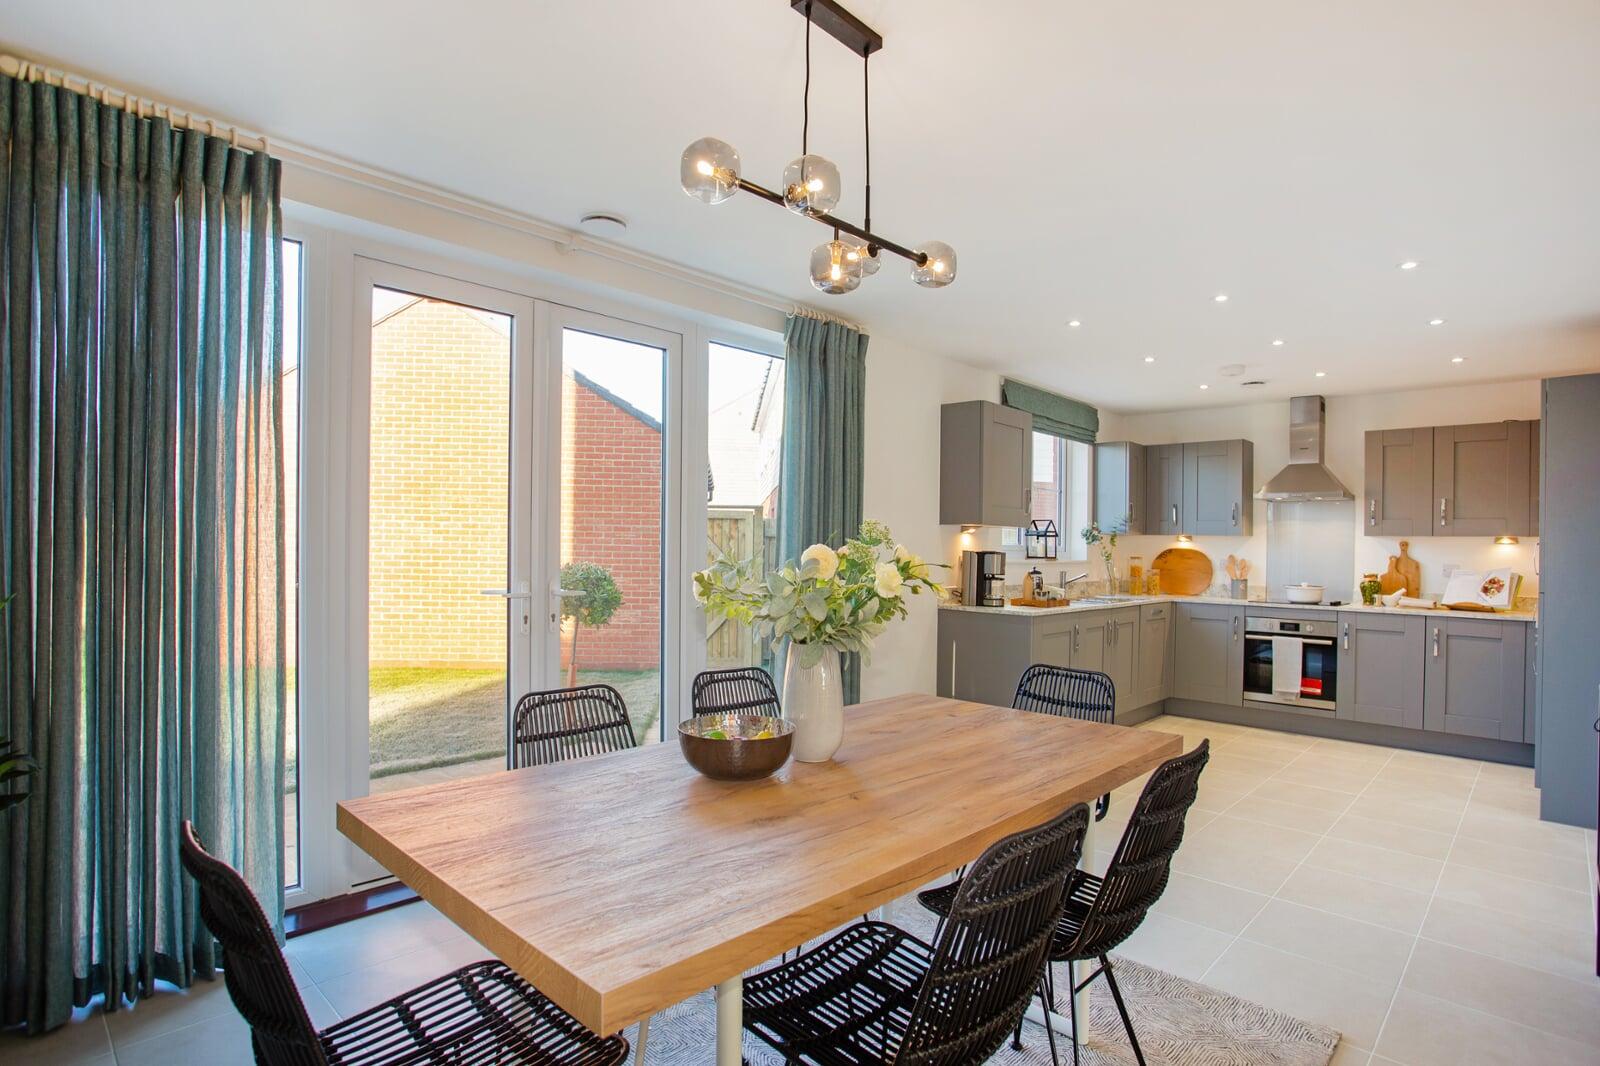 Home Reach Flex shared ownership example kitchen at Tulip Fields